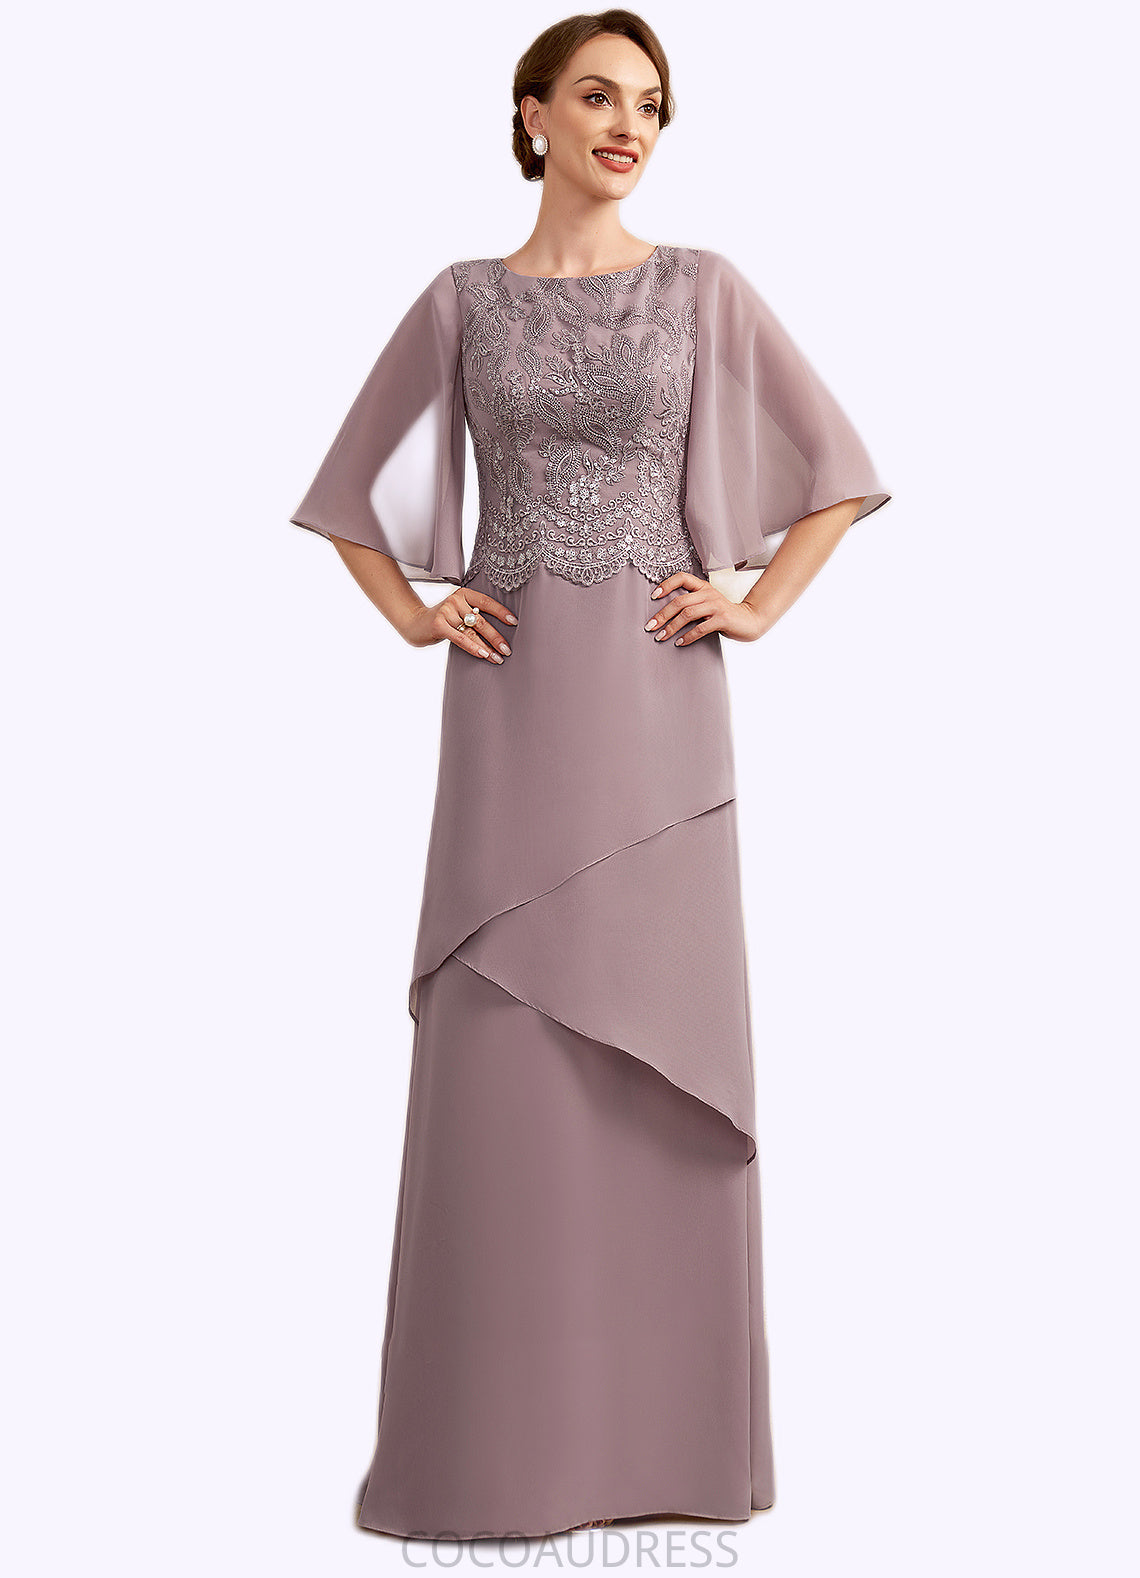 Celeste A-Line Scoop Neck Floor-Length Chiffon Lace Mother of the Bride Dress With Sequins Cascading Ruffles 126P0014991